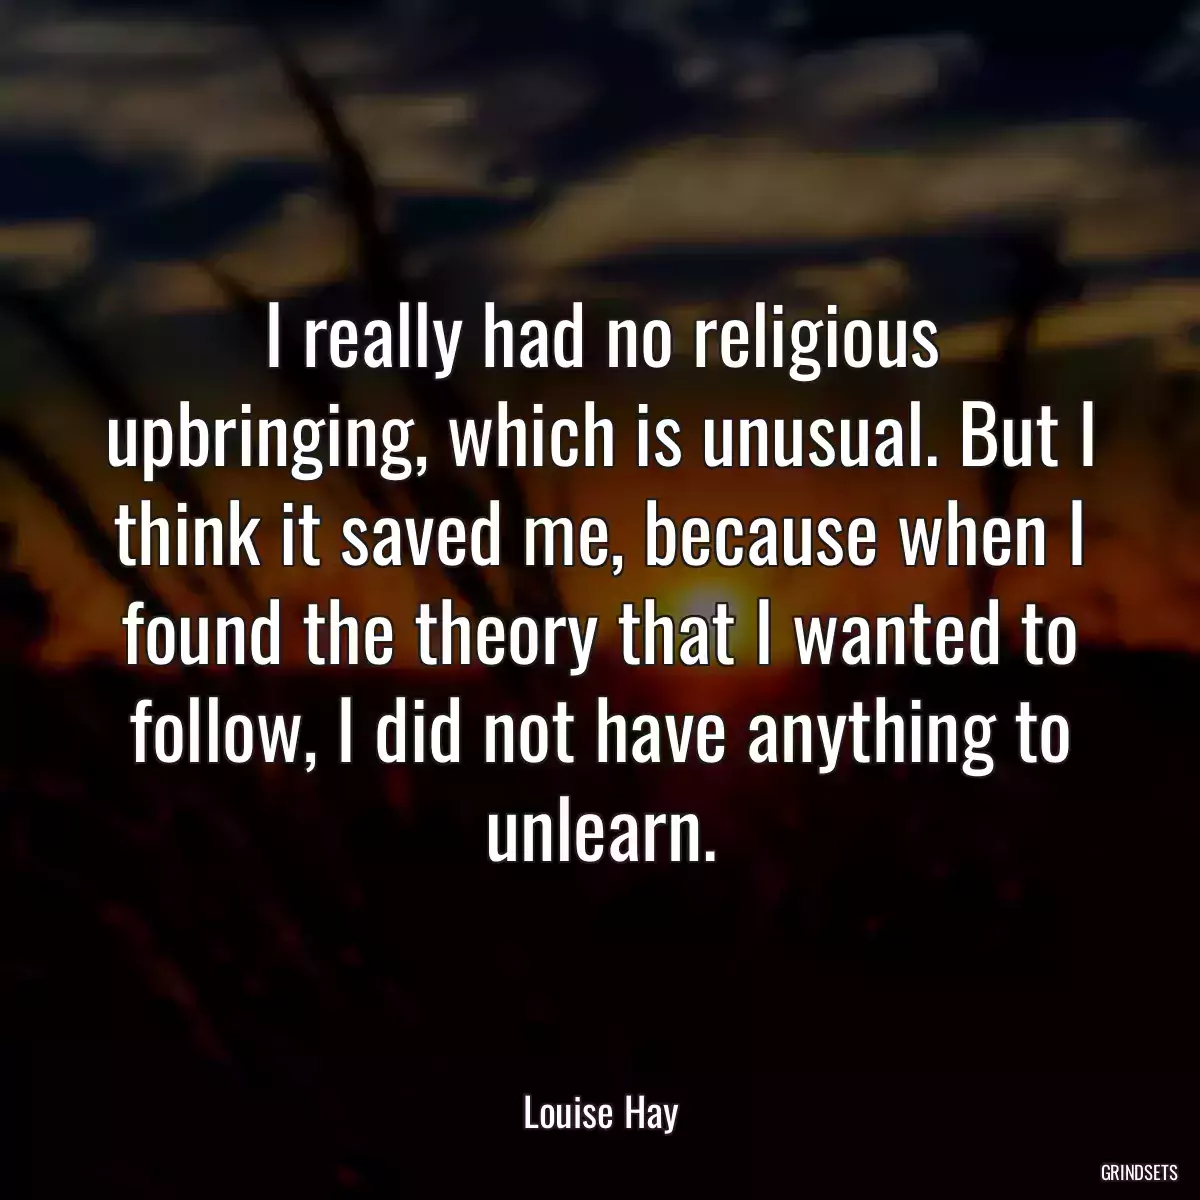 I really had no religious upbringing, which is unusual. But I think it saved me, because when I found the theory that I wanted to follow, I did not have anything to unlearn.